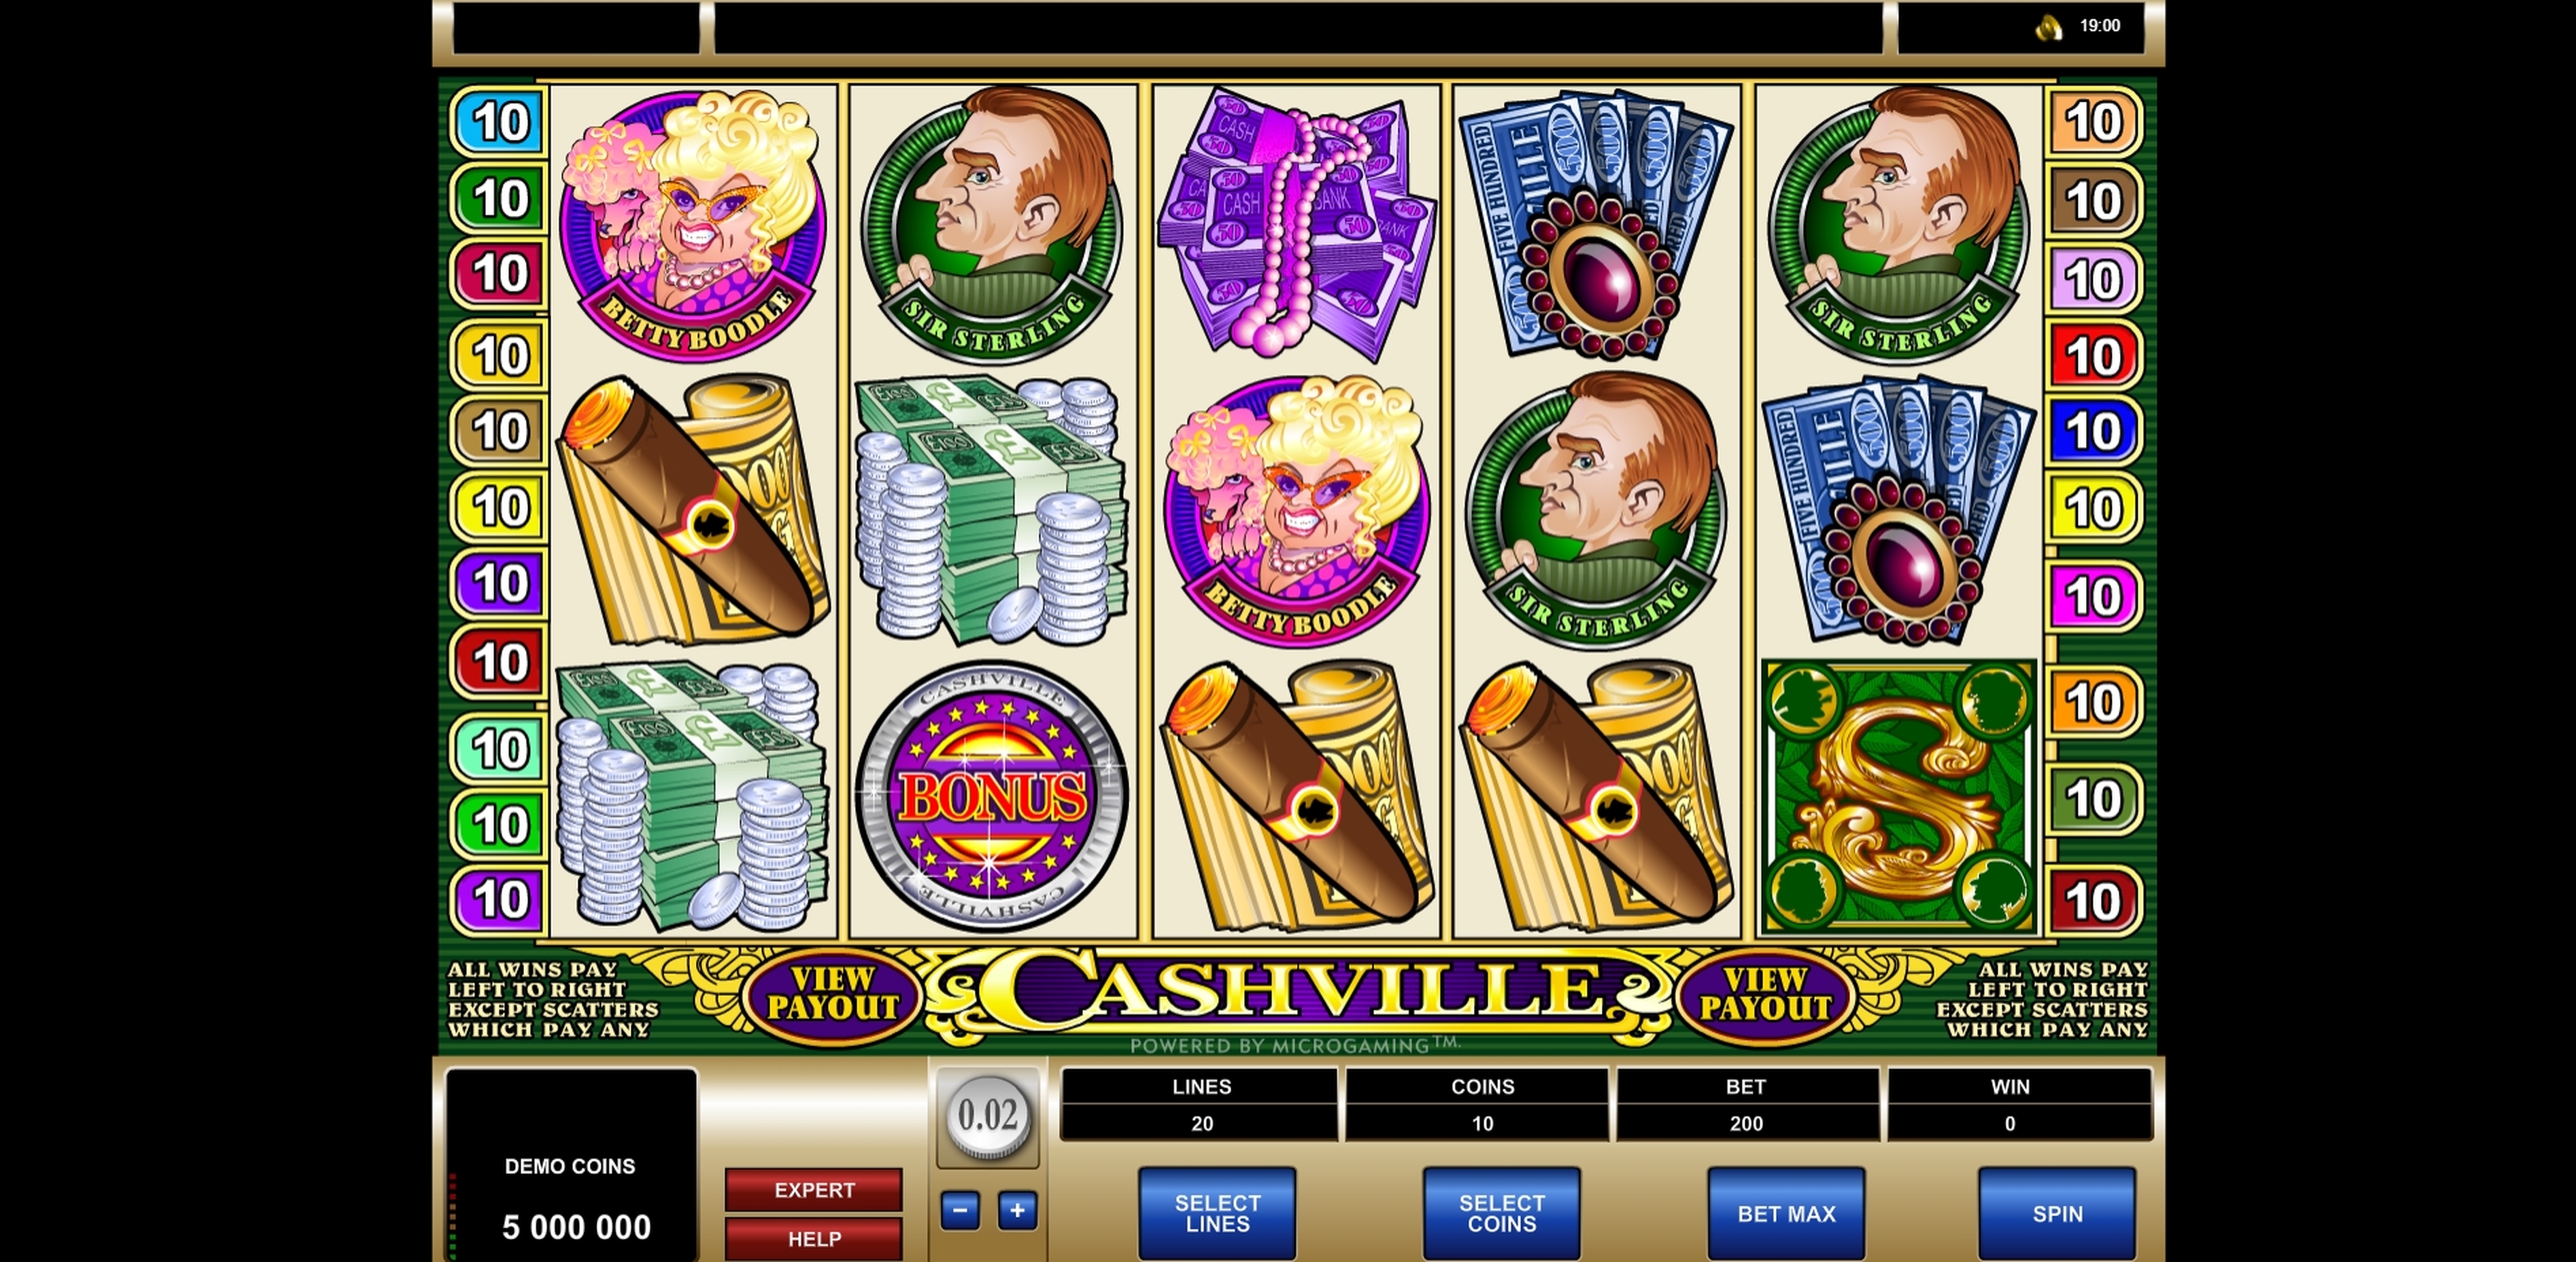 Reels in Cashville Slot Game by Microgaming